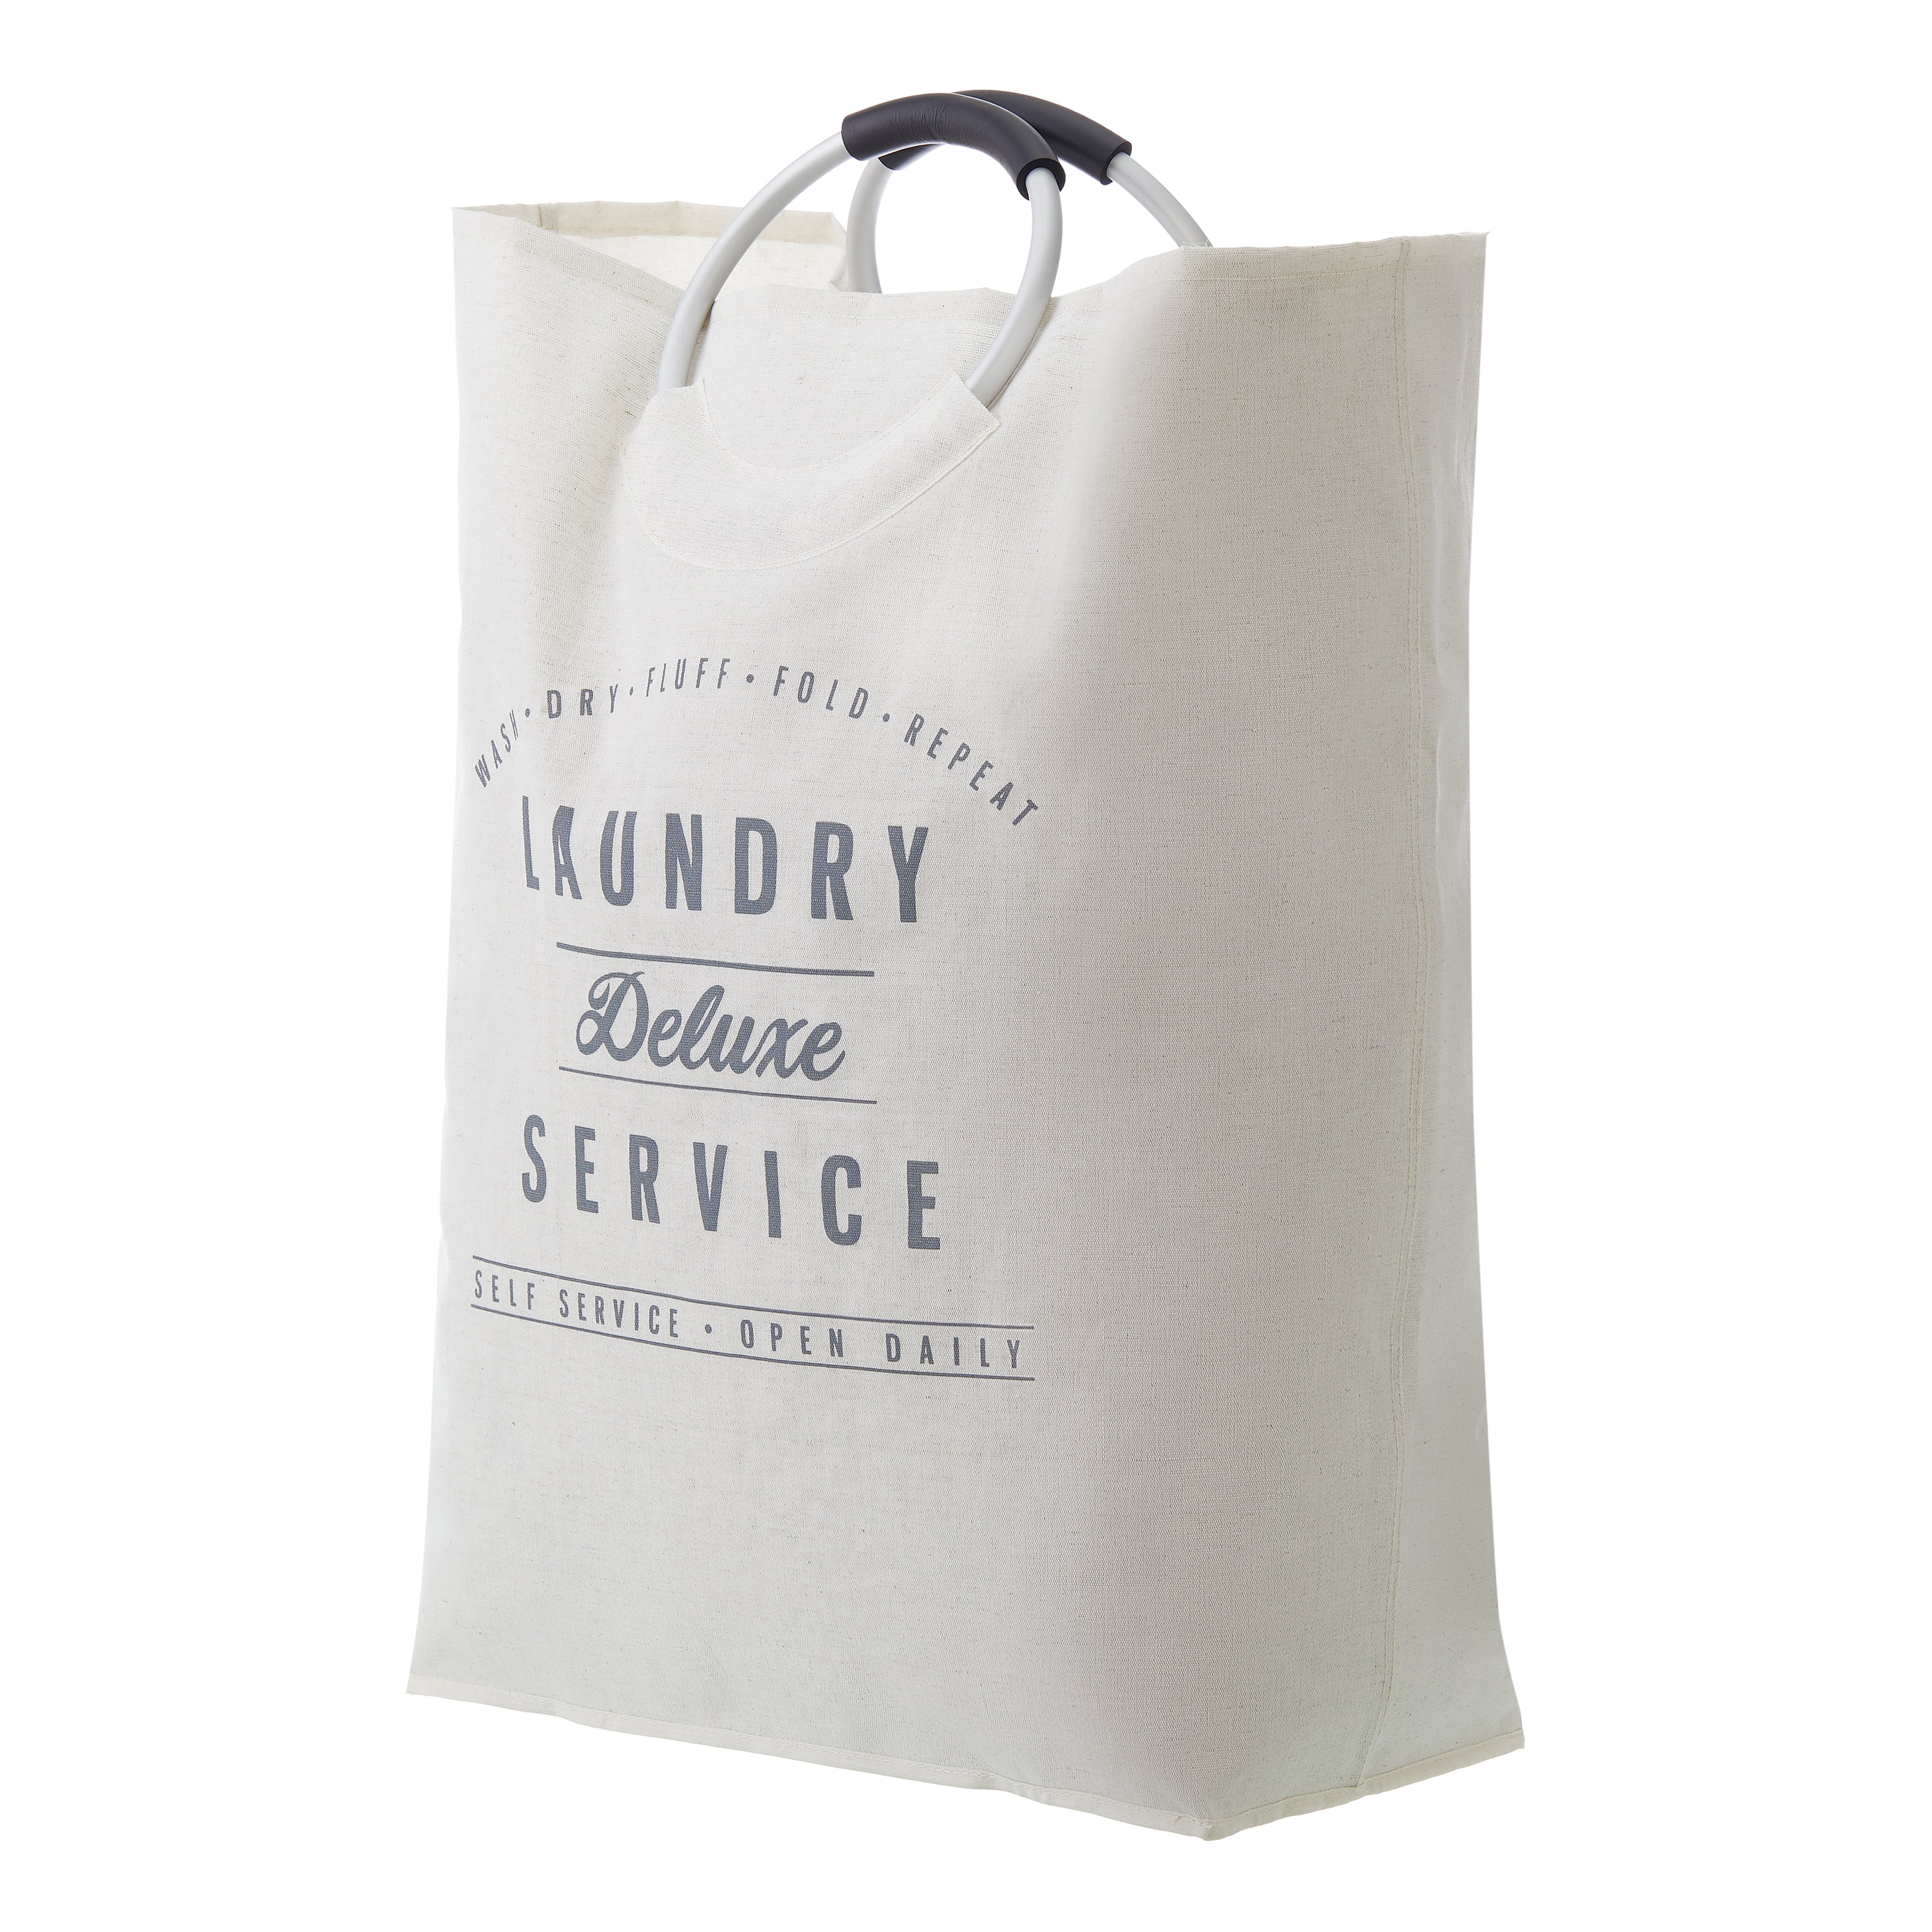 Laundry Tote